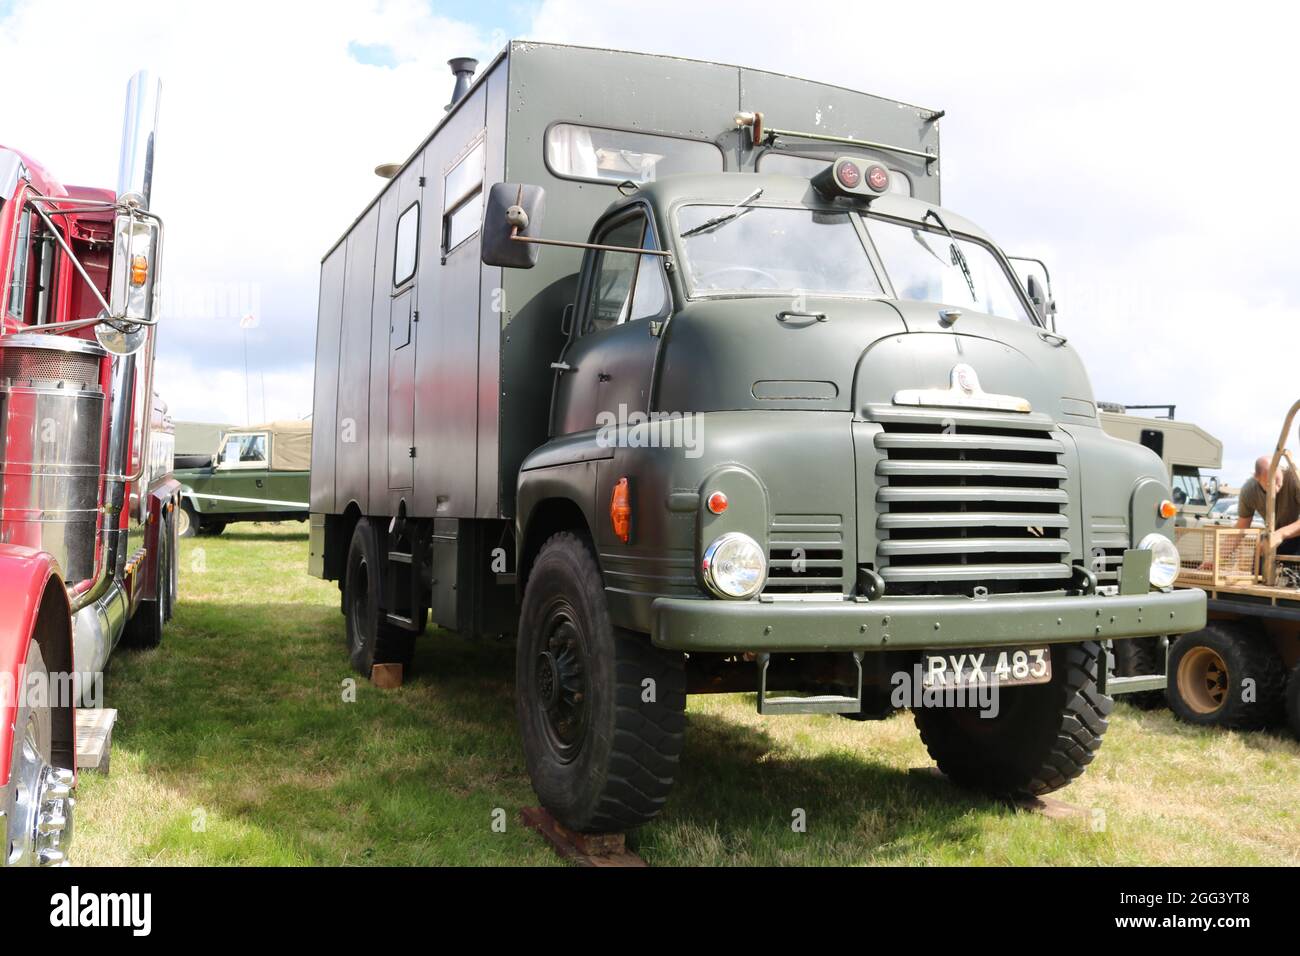 Tanks, Trucks and firewower Show, Rugby, agosto 2021 - Bedford camion. Foto Stock